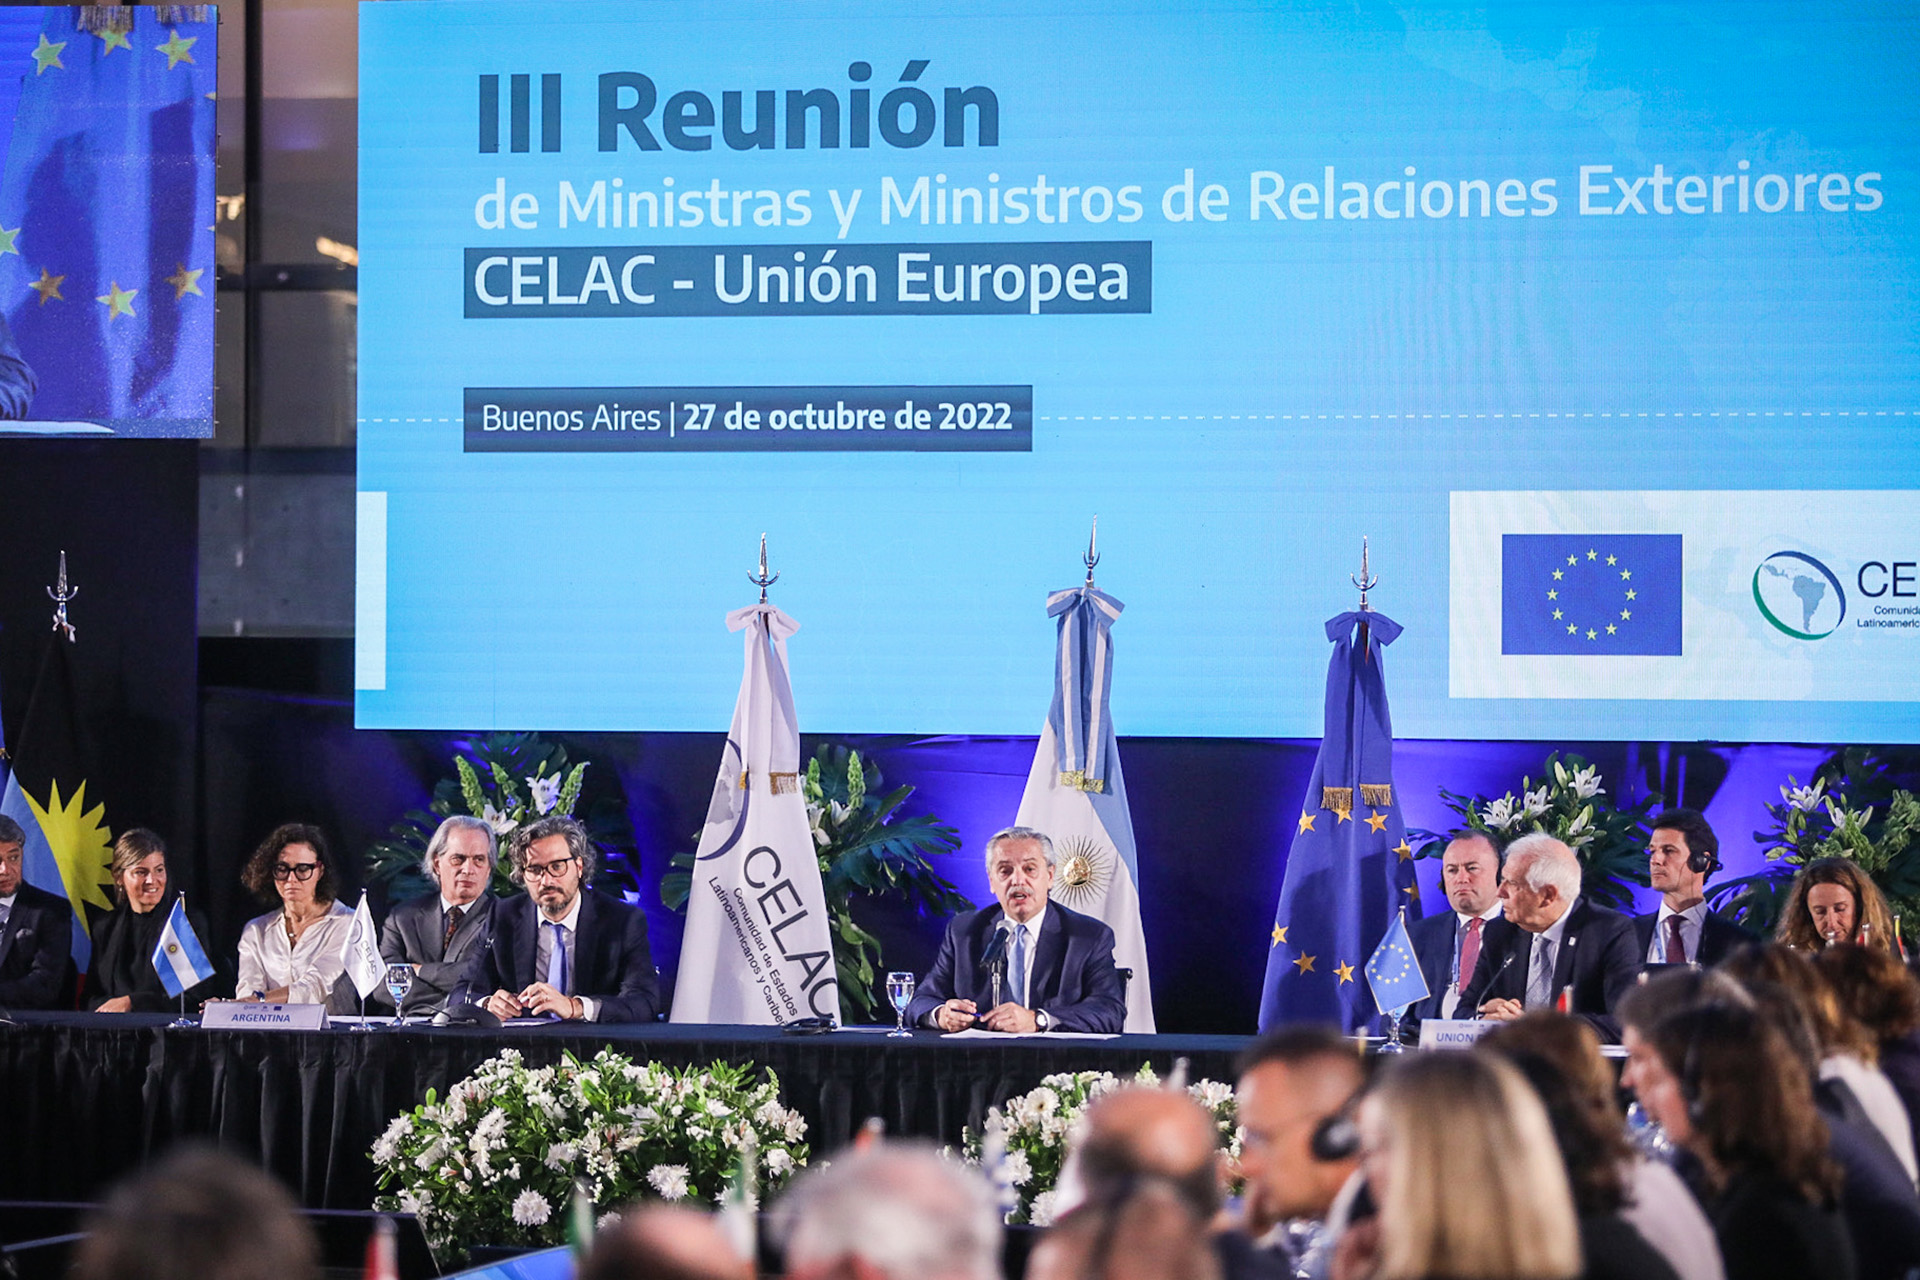 Alberto Fernández opened the summit meeting between CELAC and the European Union.